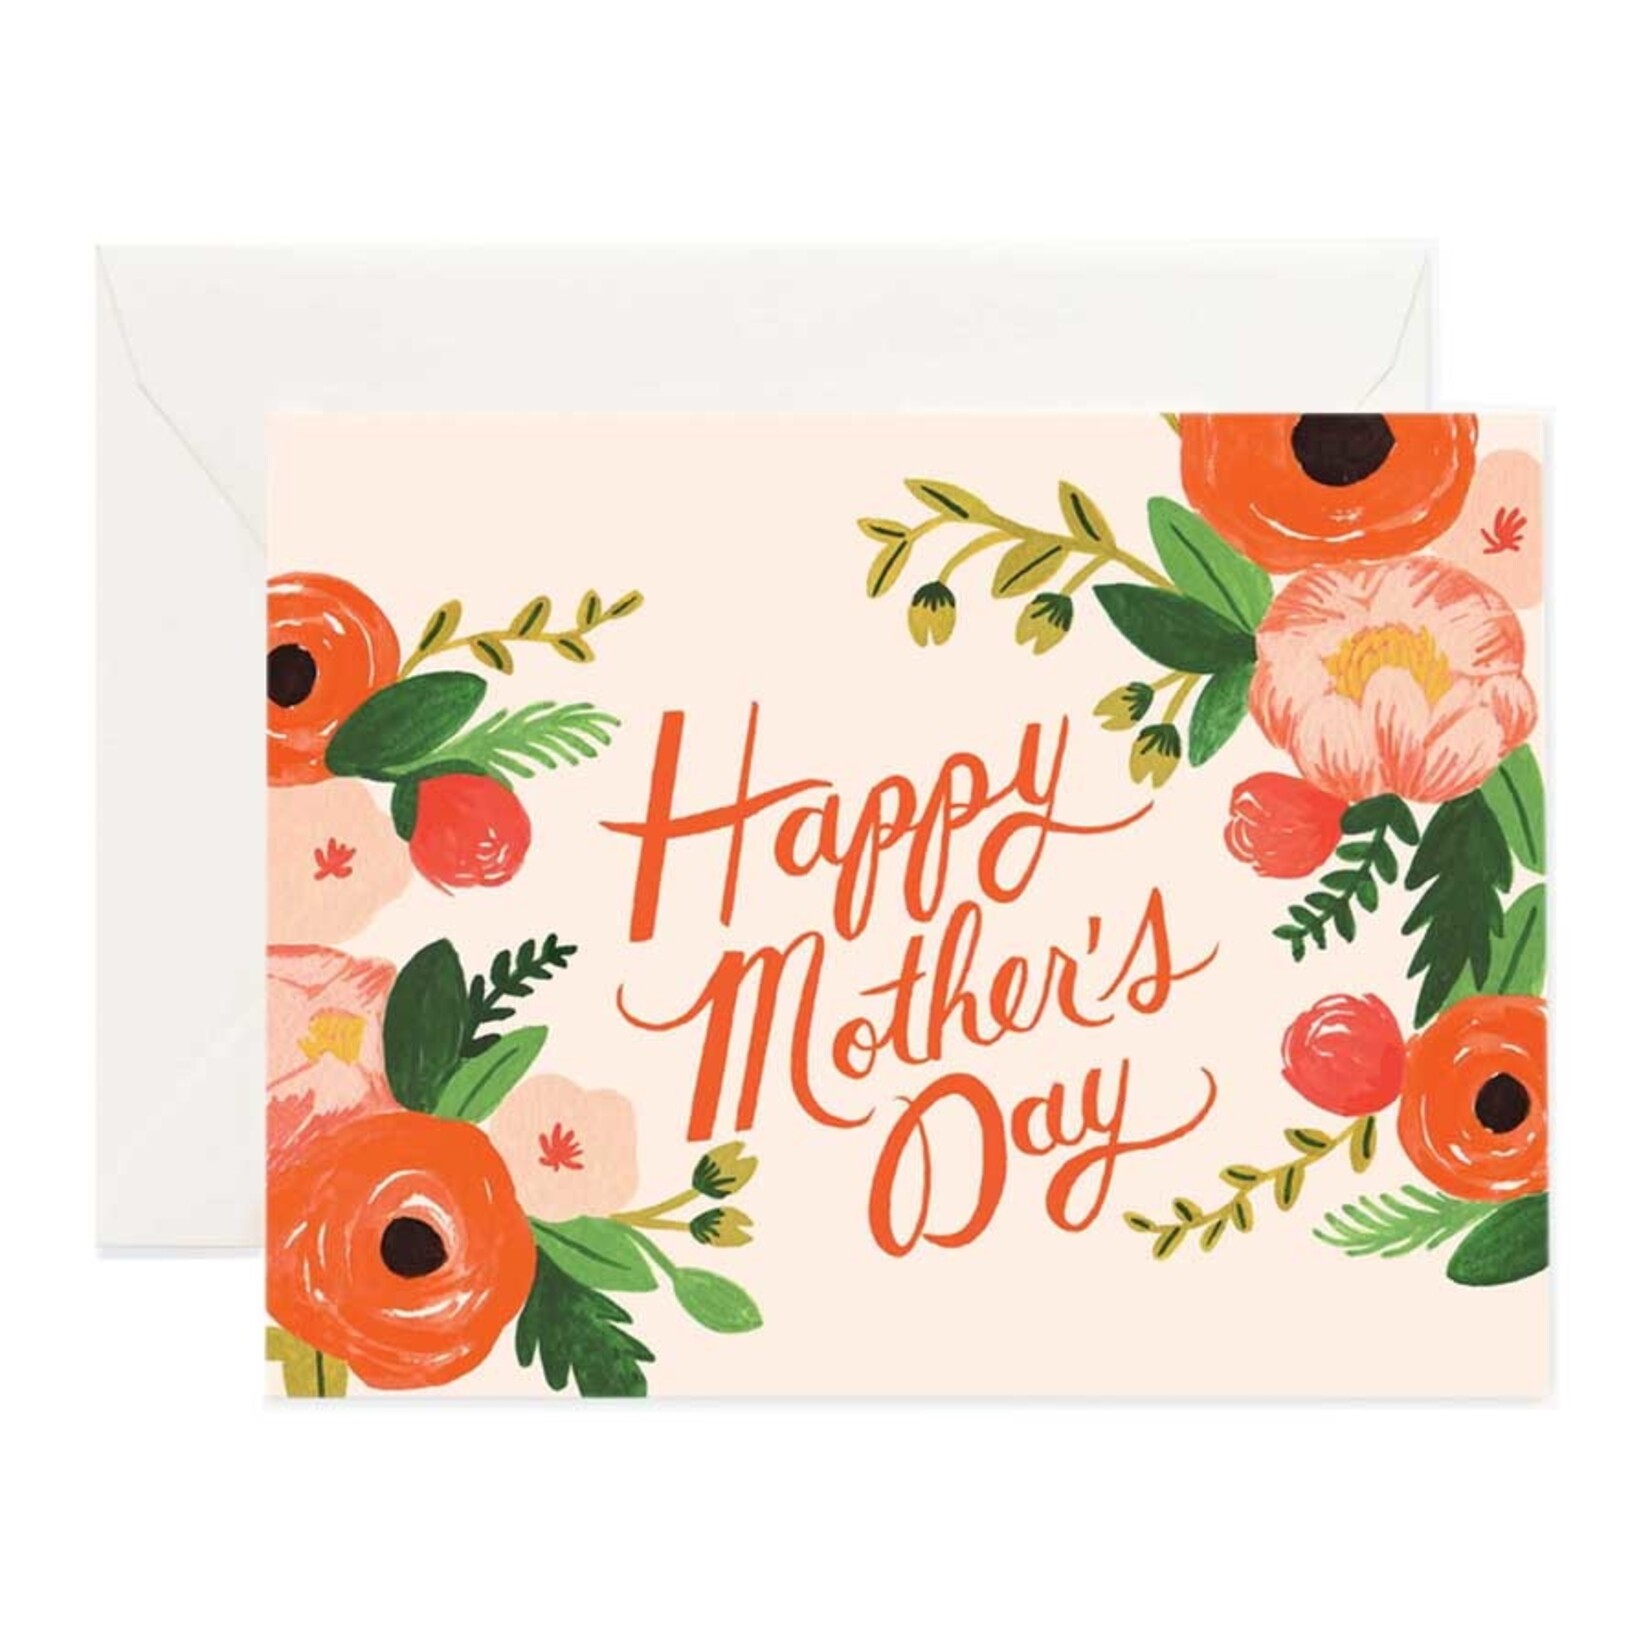 Rifle Paper Company Happy Mothers Day